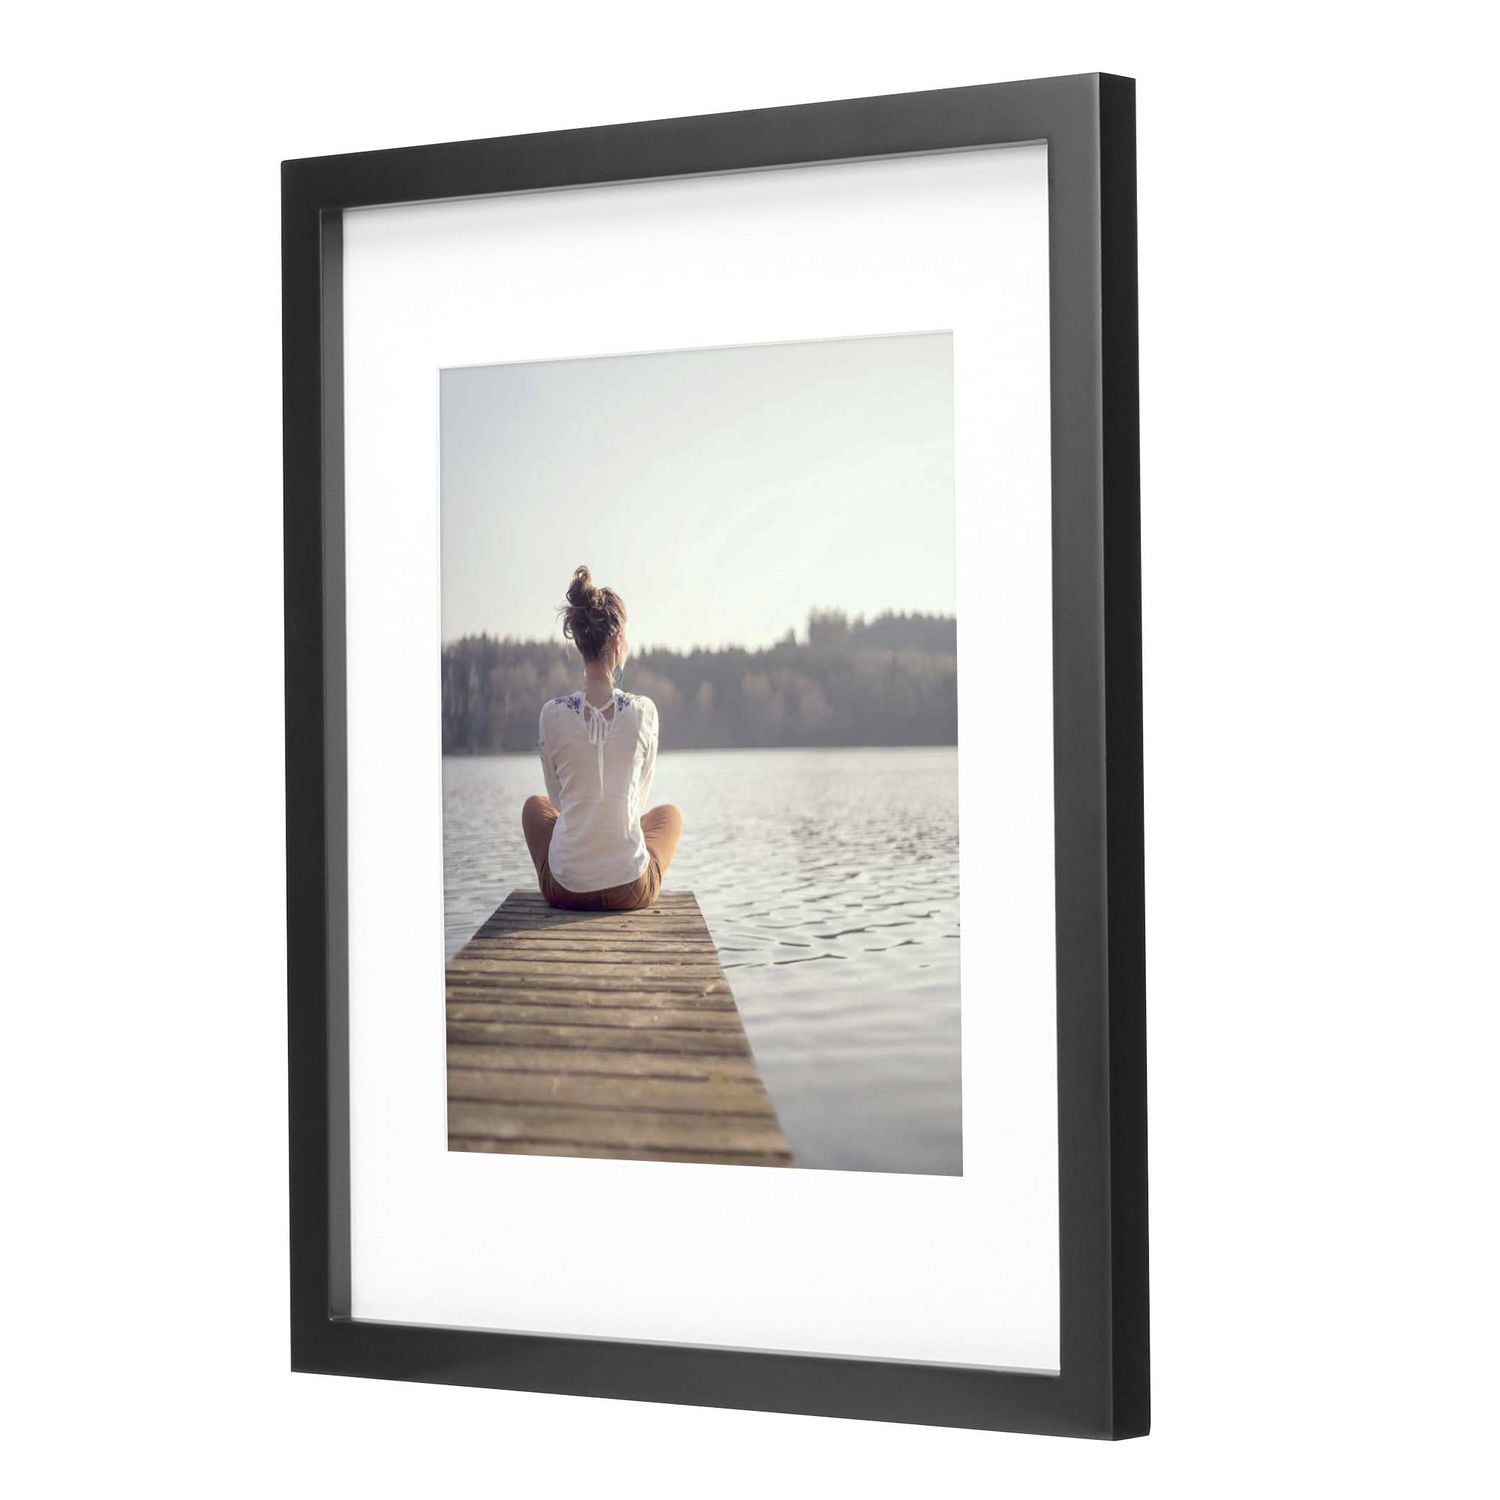 hometrends Gallery Black Picture Frame, 11 x 14/8 x 10